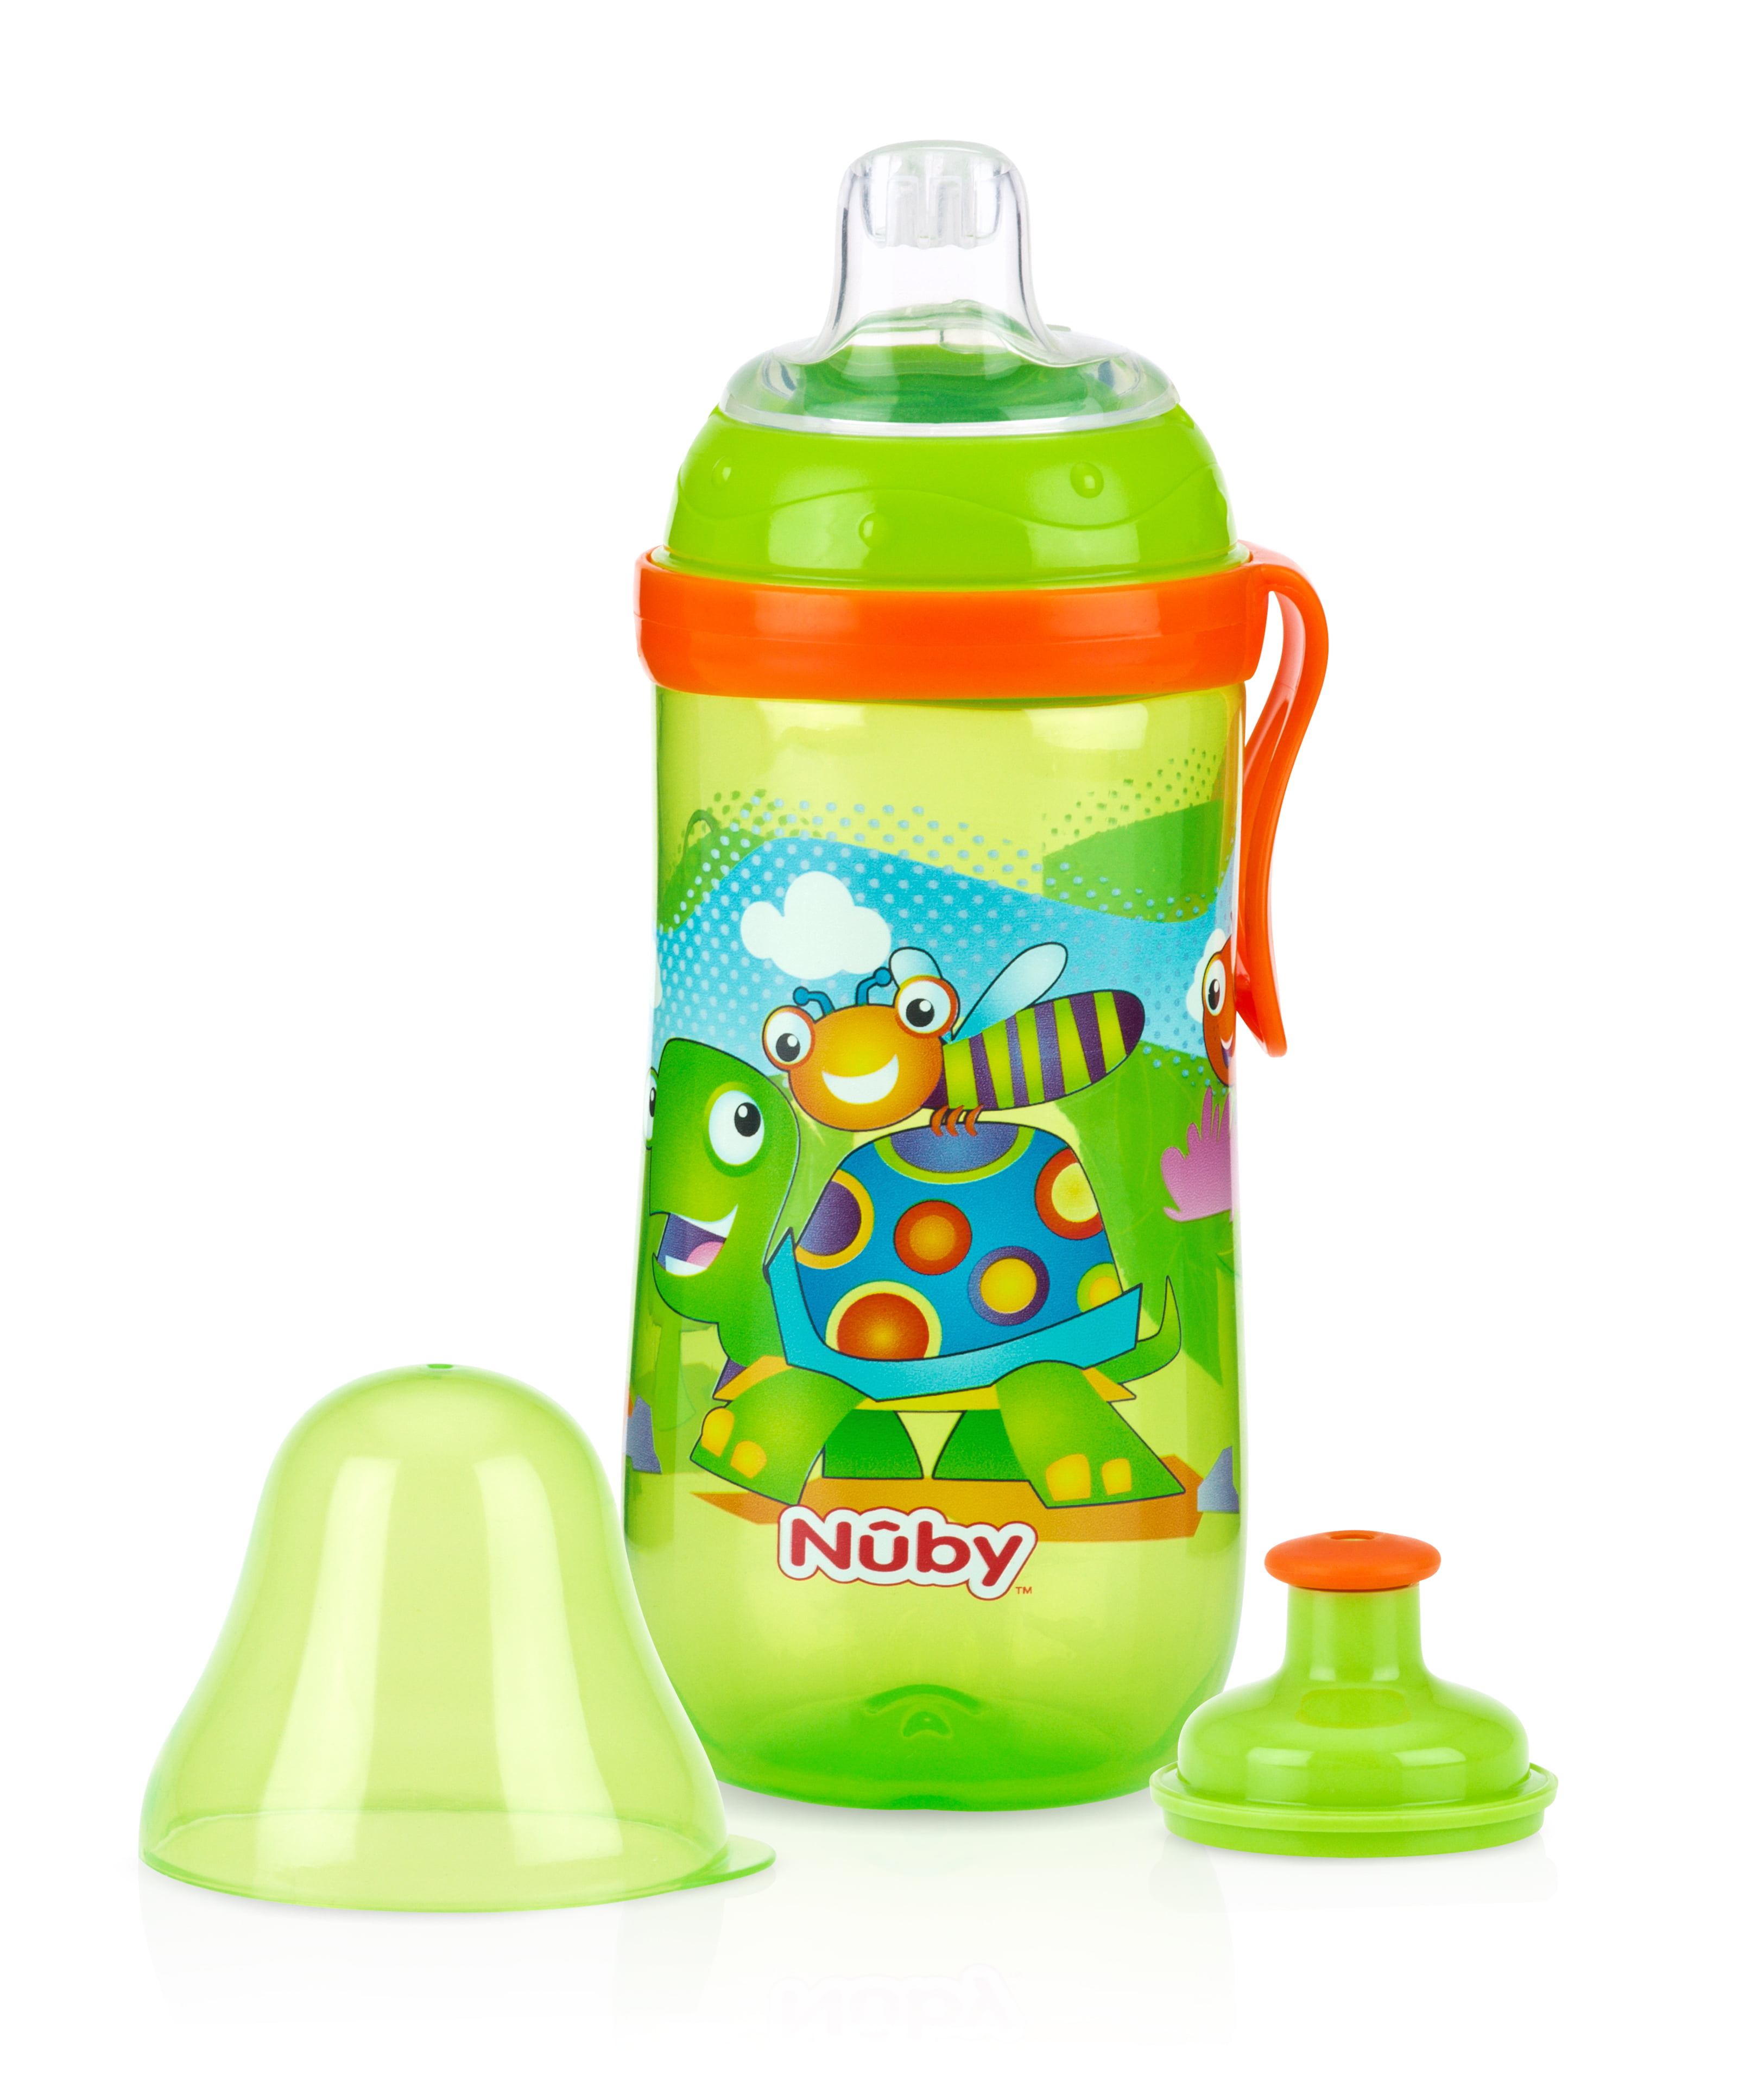 Nuby Busy Sipper Cup - Lime